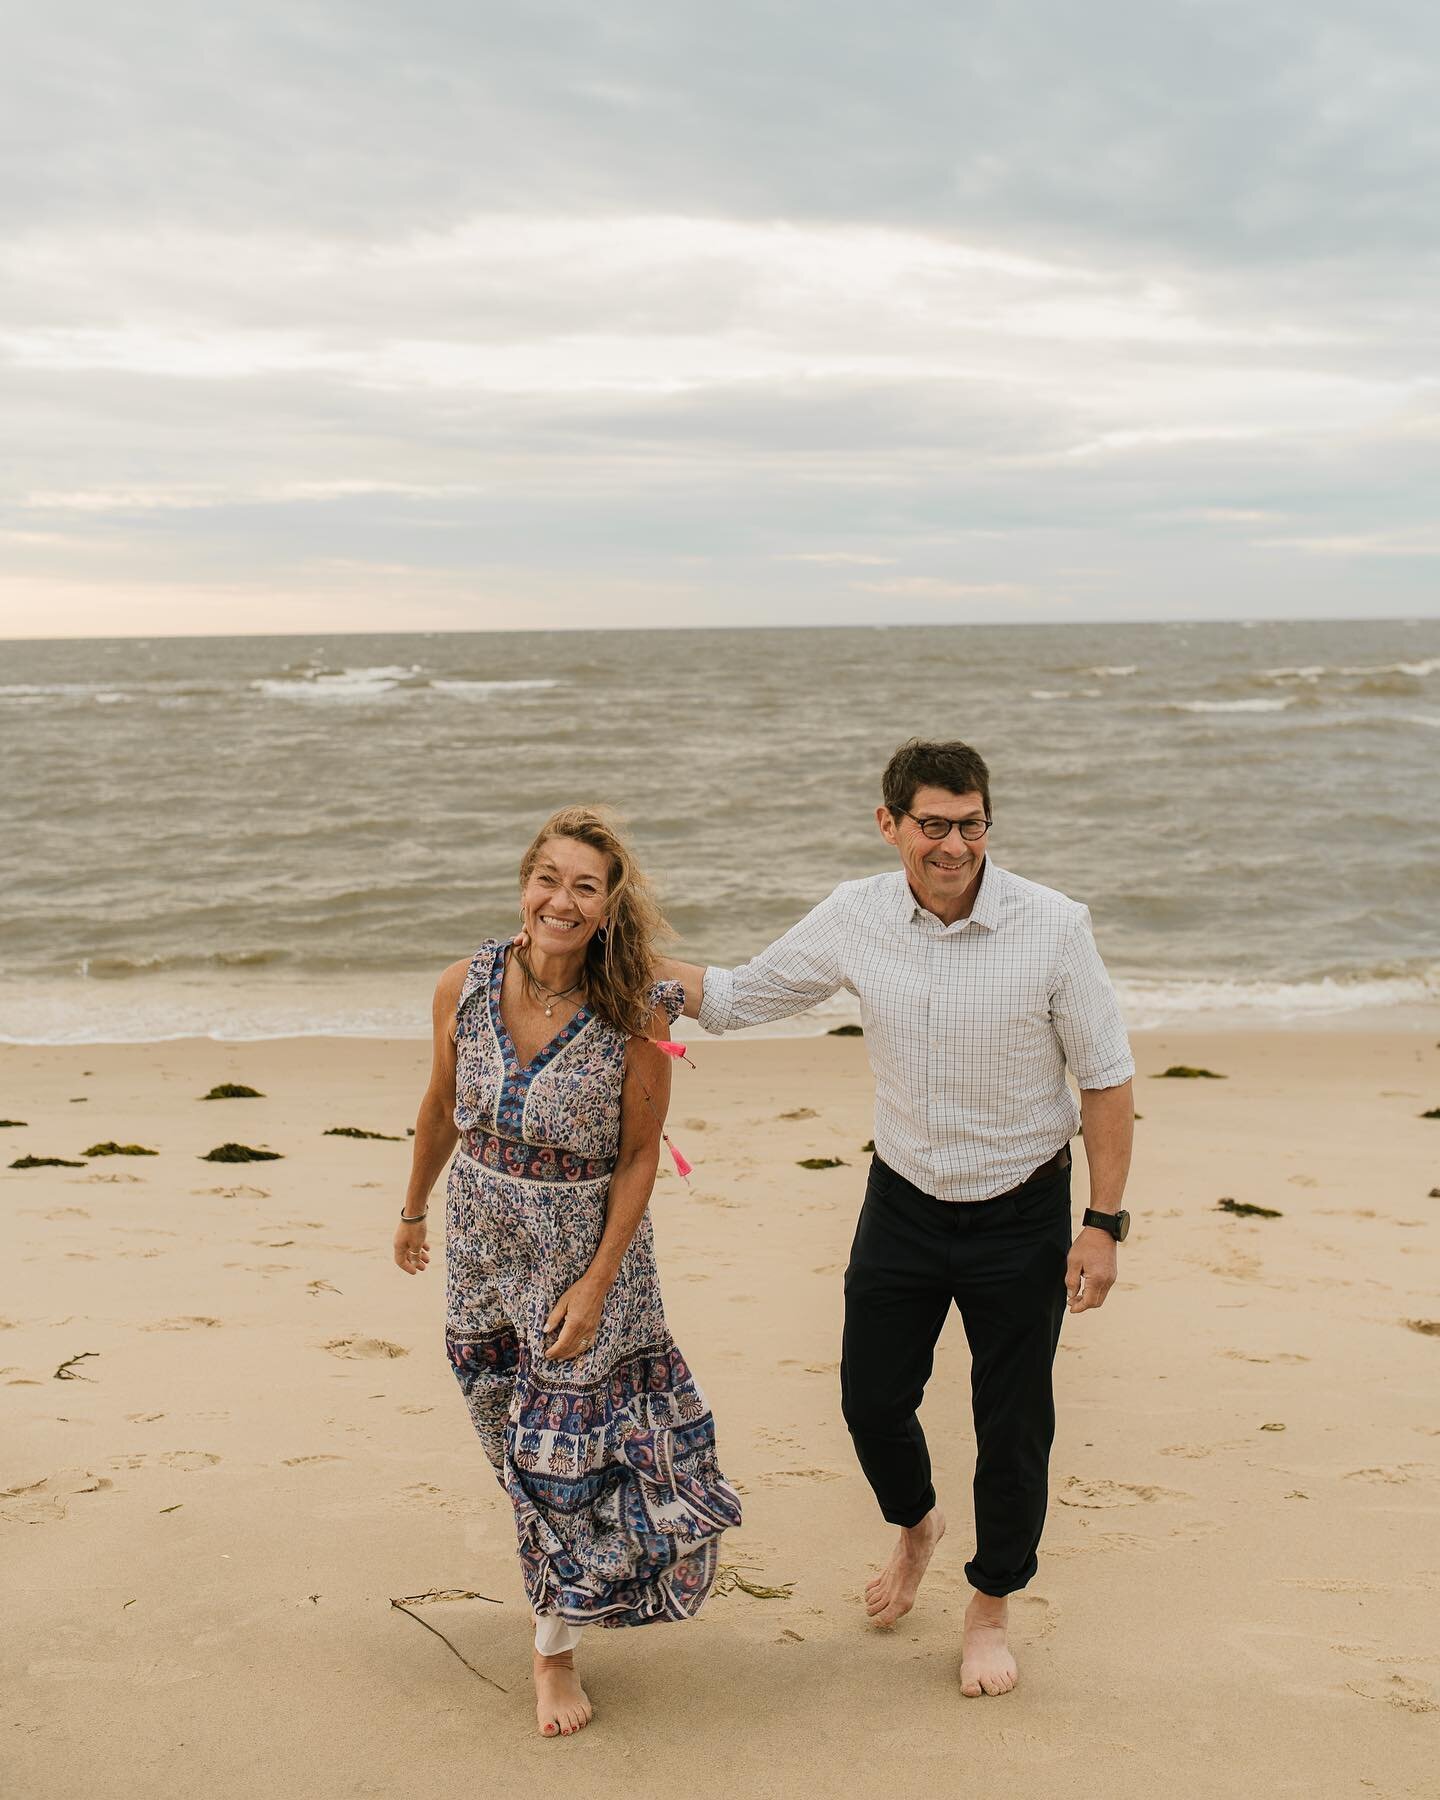 Happy 30th anniversary to my parents! This summer they organized an incredibly special family trip to Nantucket where we got to spend a whole week celebrating and spending time together. They always wished they had a small wedding on the beach, so th